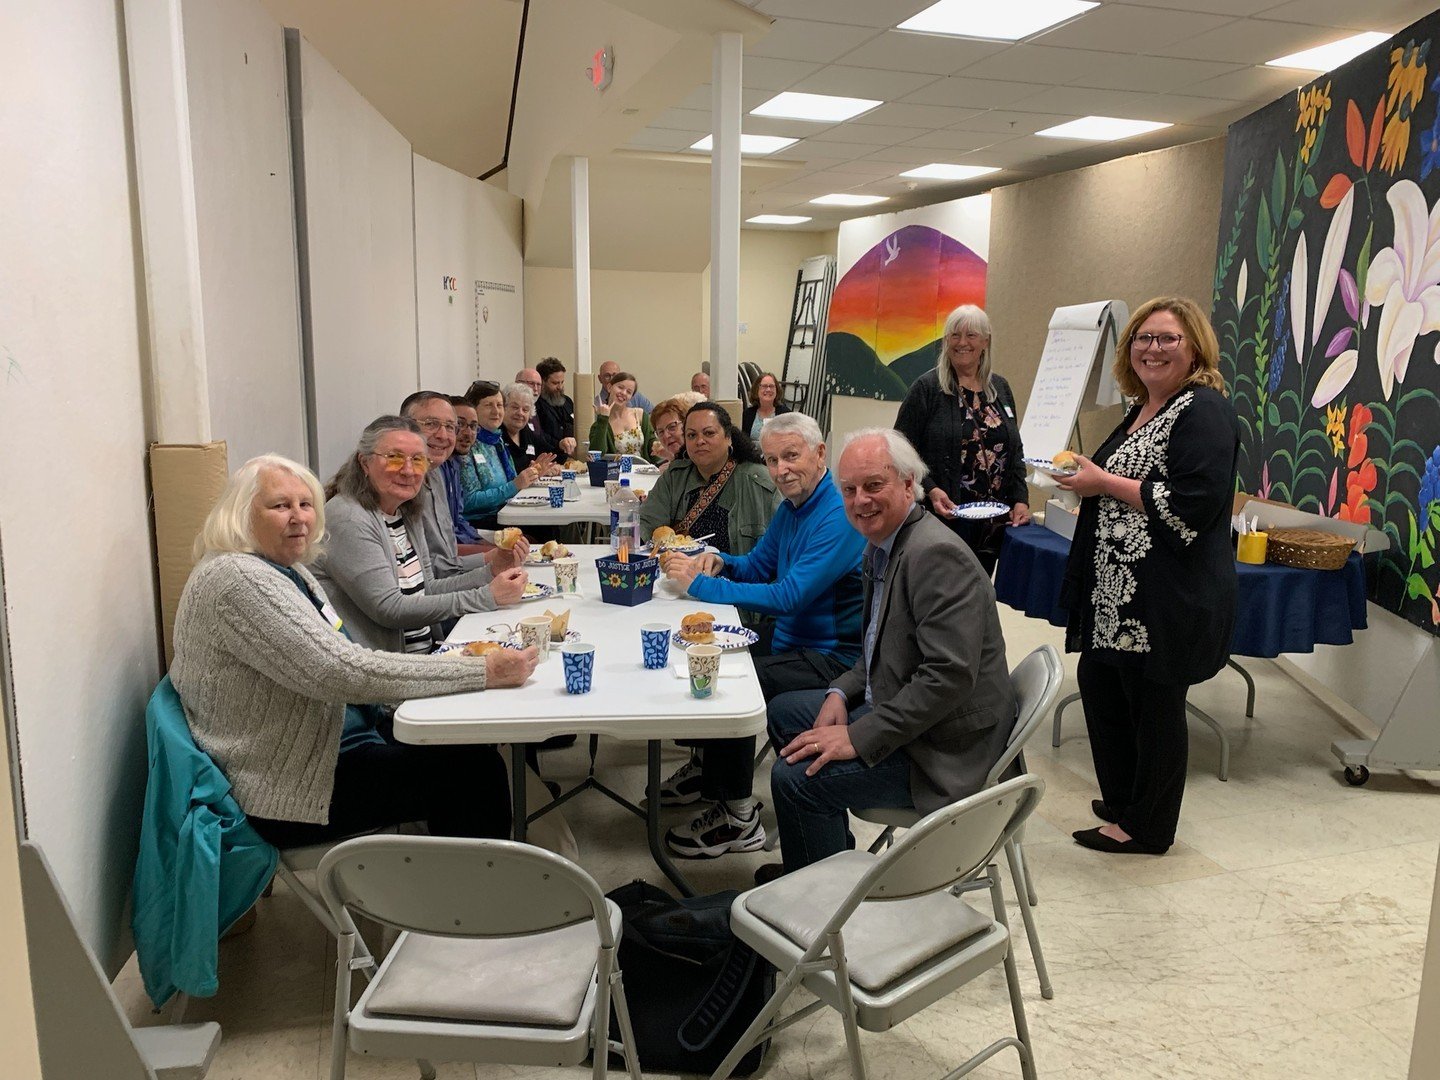 Join us for worship on Sunday!  Pastor Beth will preach a sermon about the Ascension based on Acts 1:1-11 and Luke 24:44-53. 

Pictured here is our Lunch &amp; Learn gathering last Sunday.